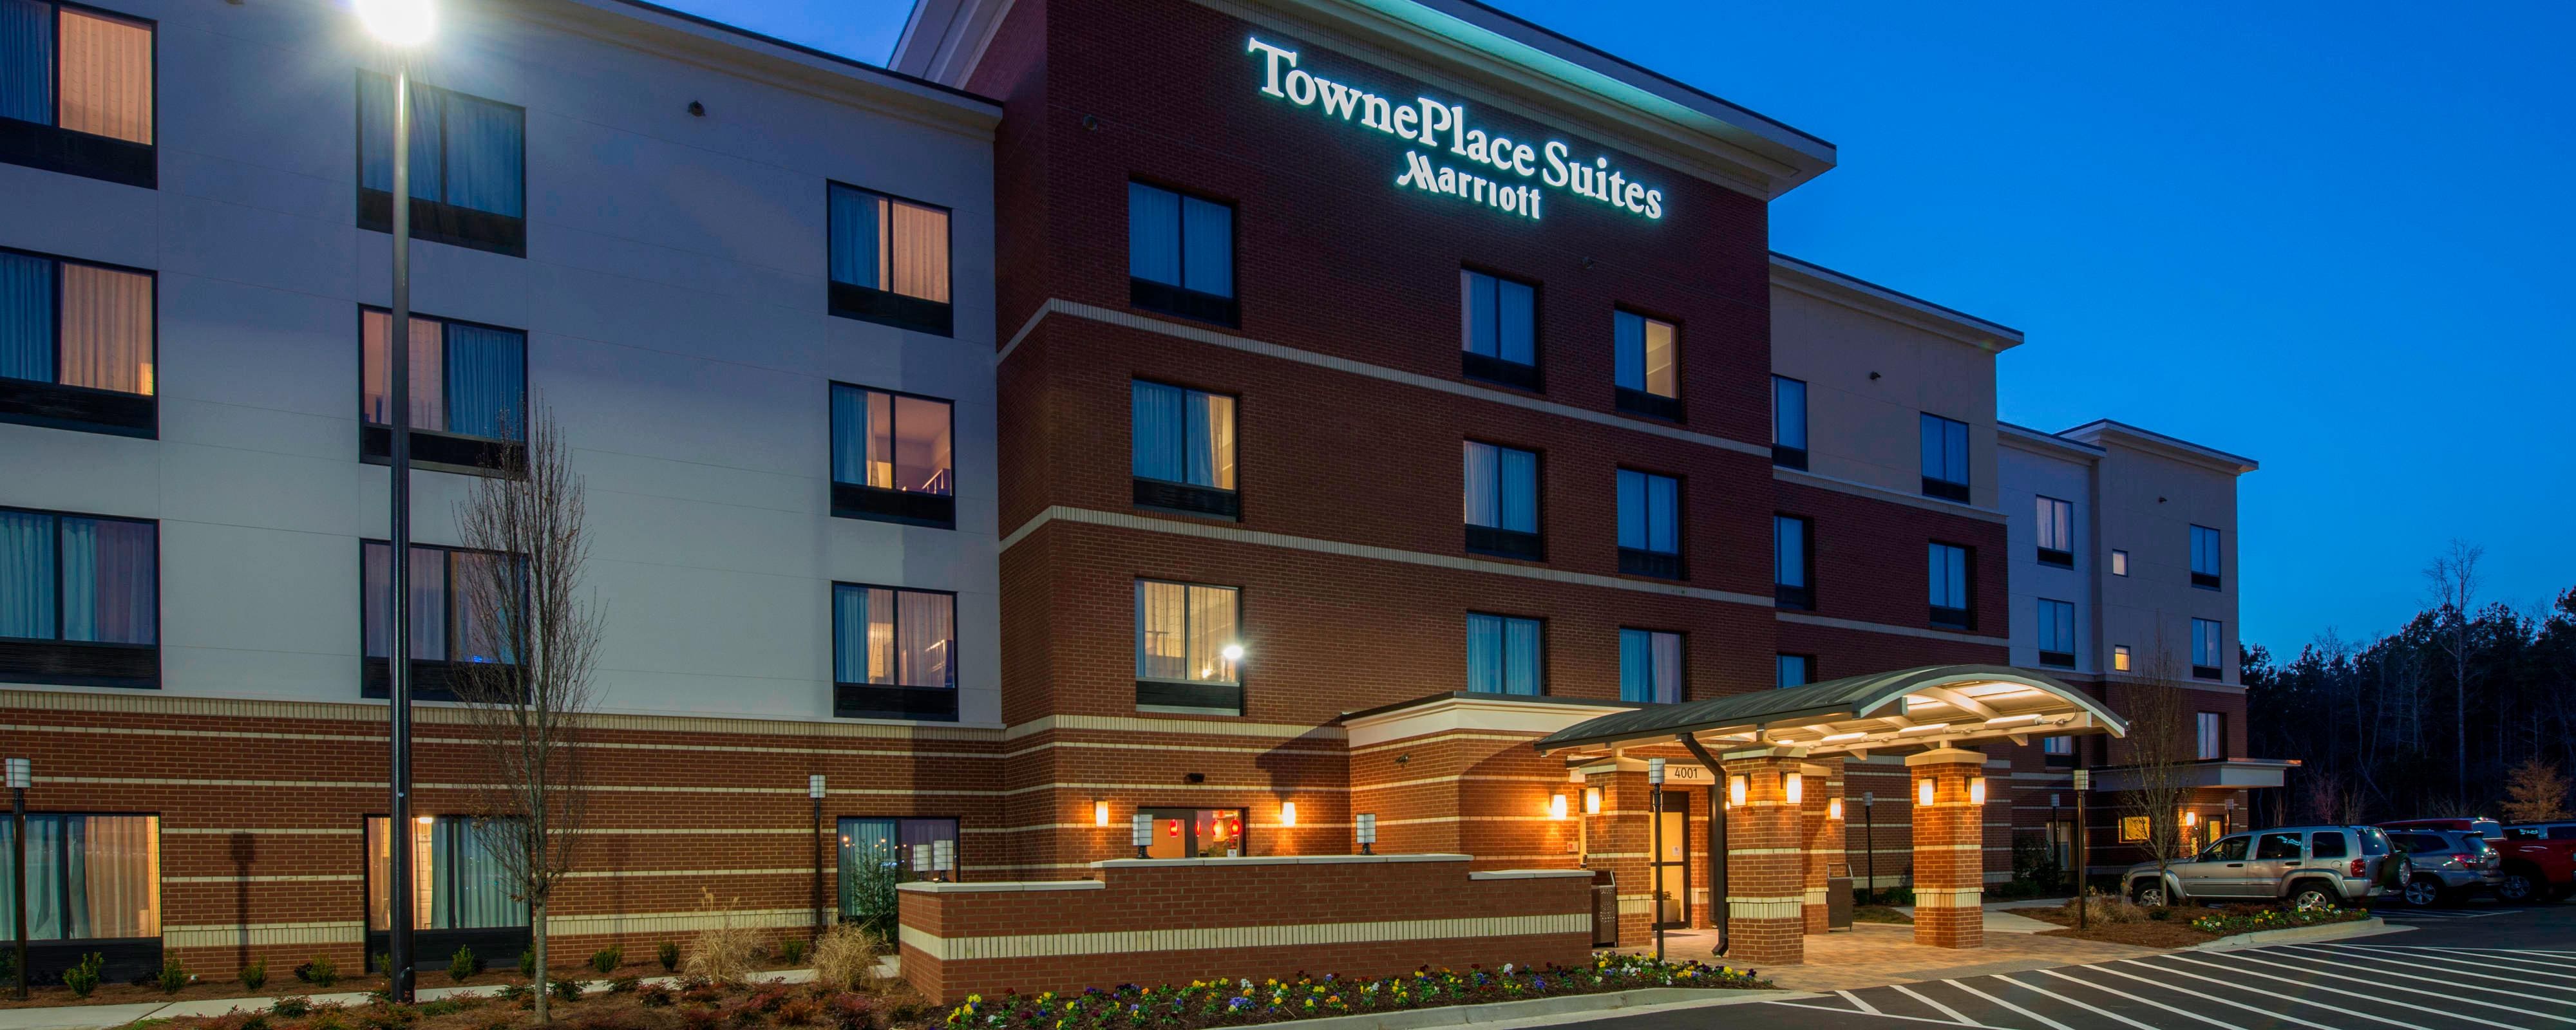 Hotel Dining Restaurants Towneplace Suites Newnan